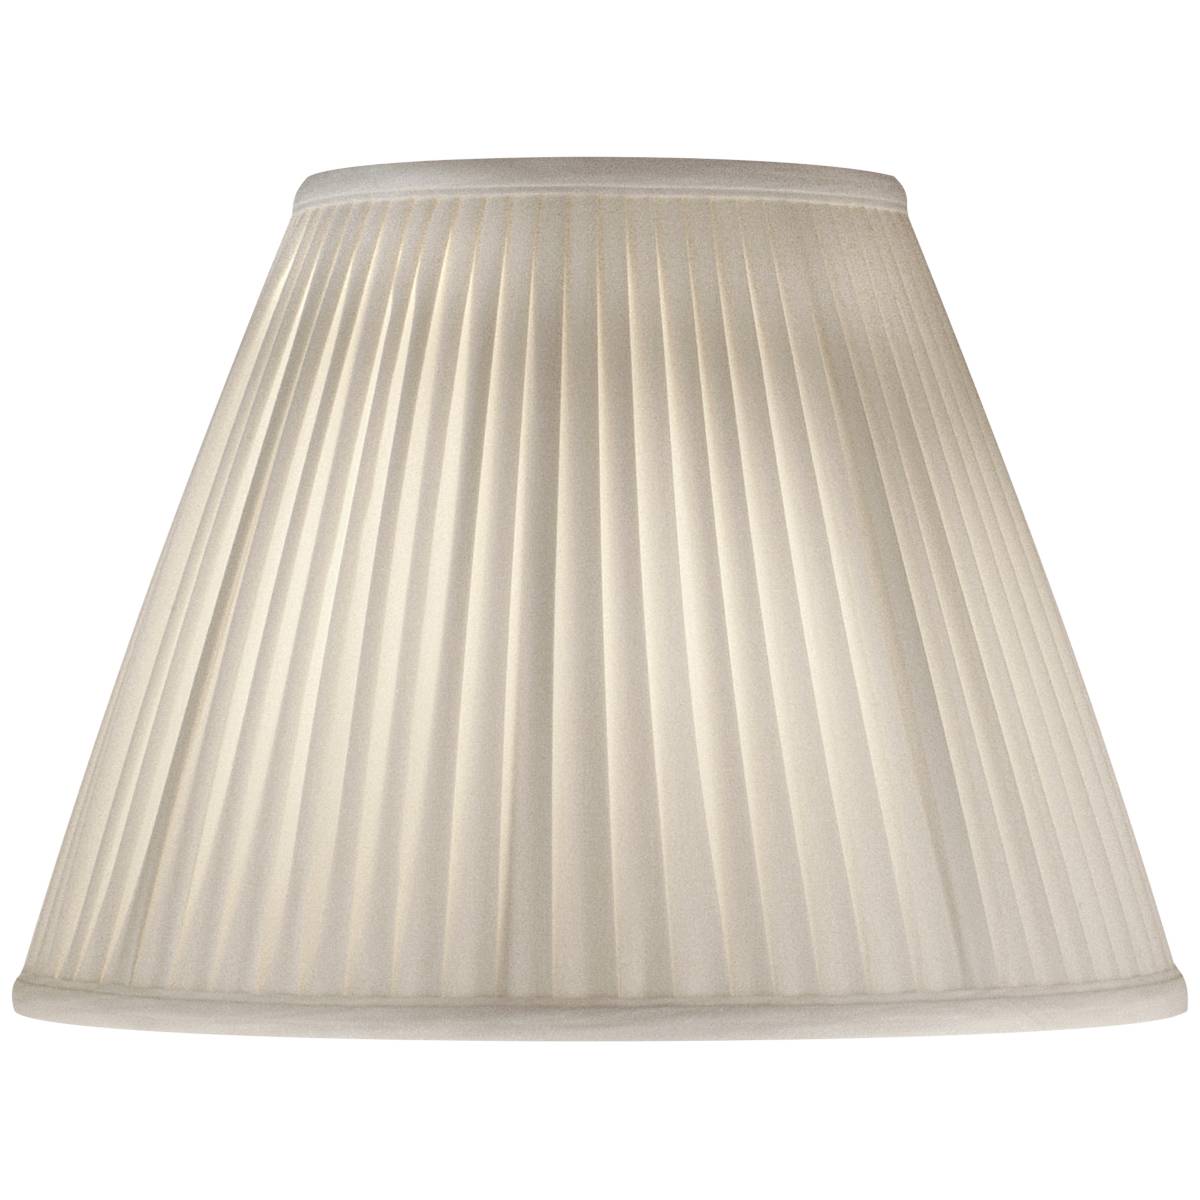 13 In. To 16 In., Stiffel, Lamp Shades | Lamps Plus